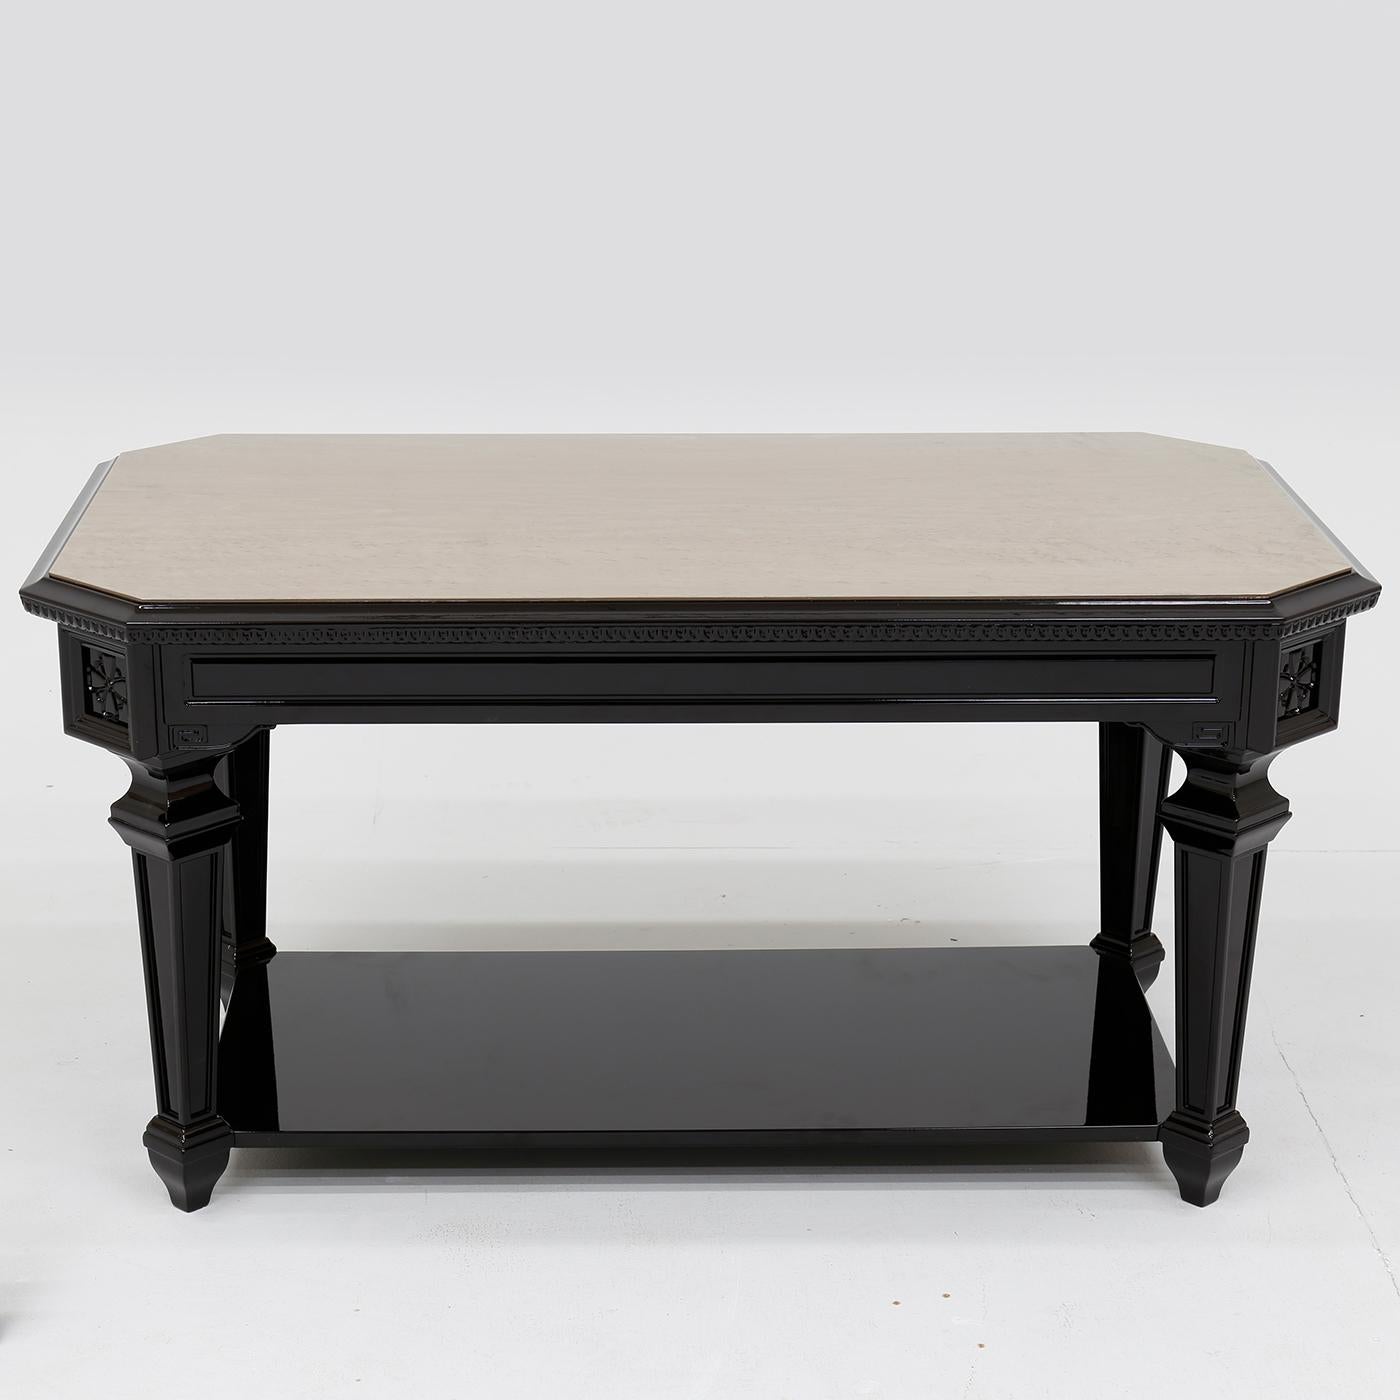 An exquisite combination of refined materials, this coffee table will make a statement in both a classic or modern decor thanks to its simple yet charming design. Distinguished by an elegant polished finish, the wooden base structure features four